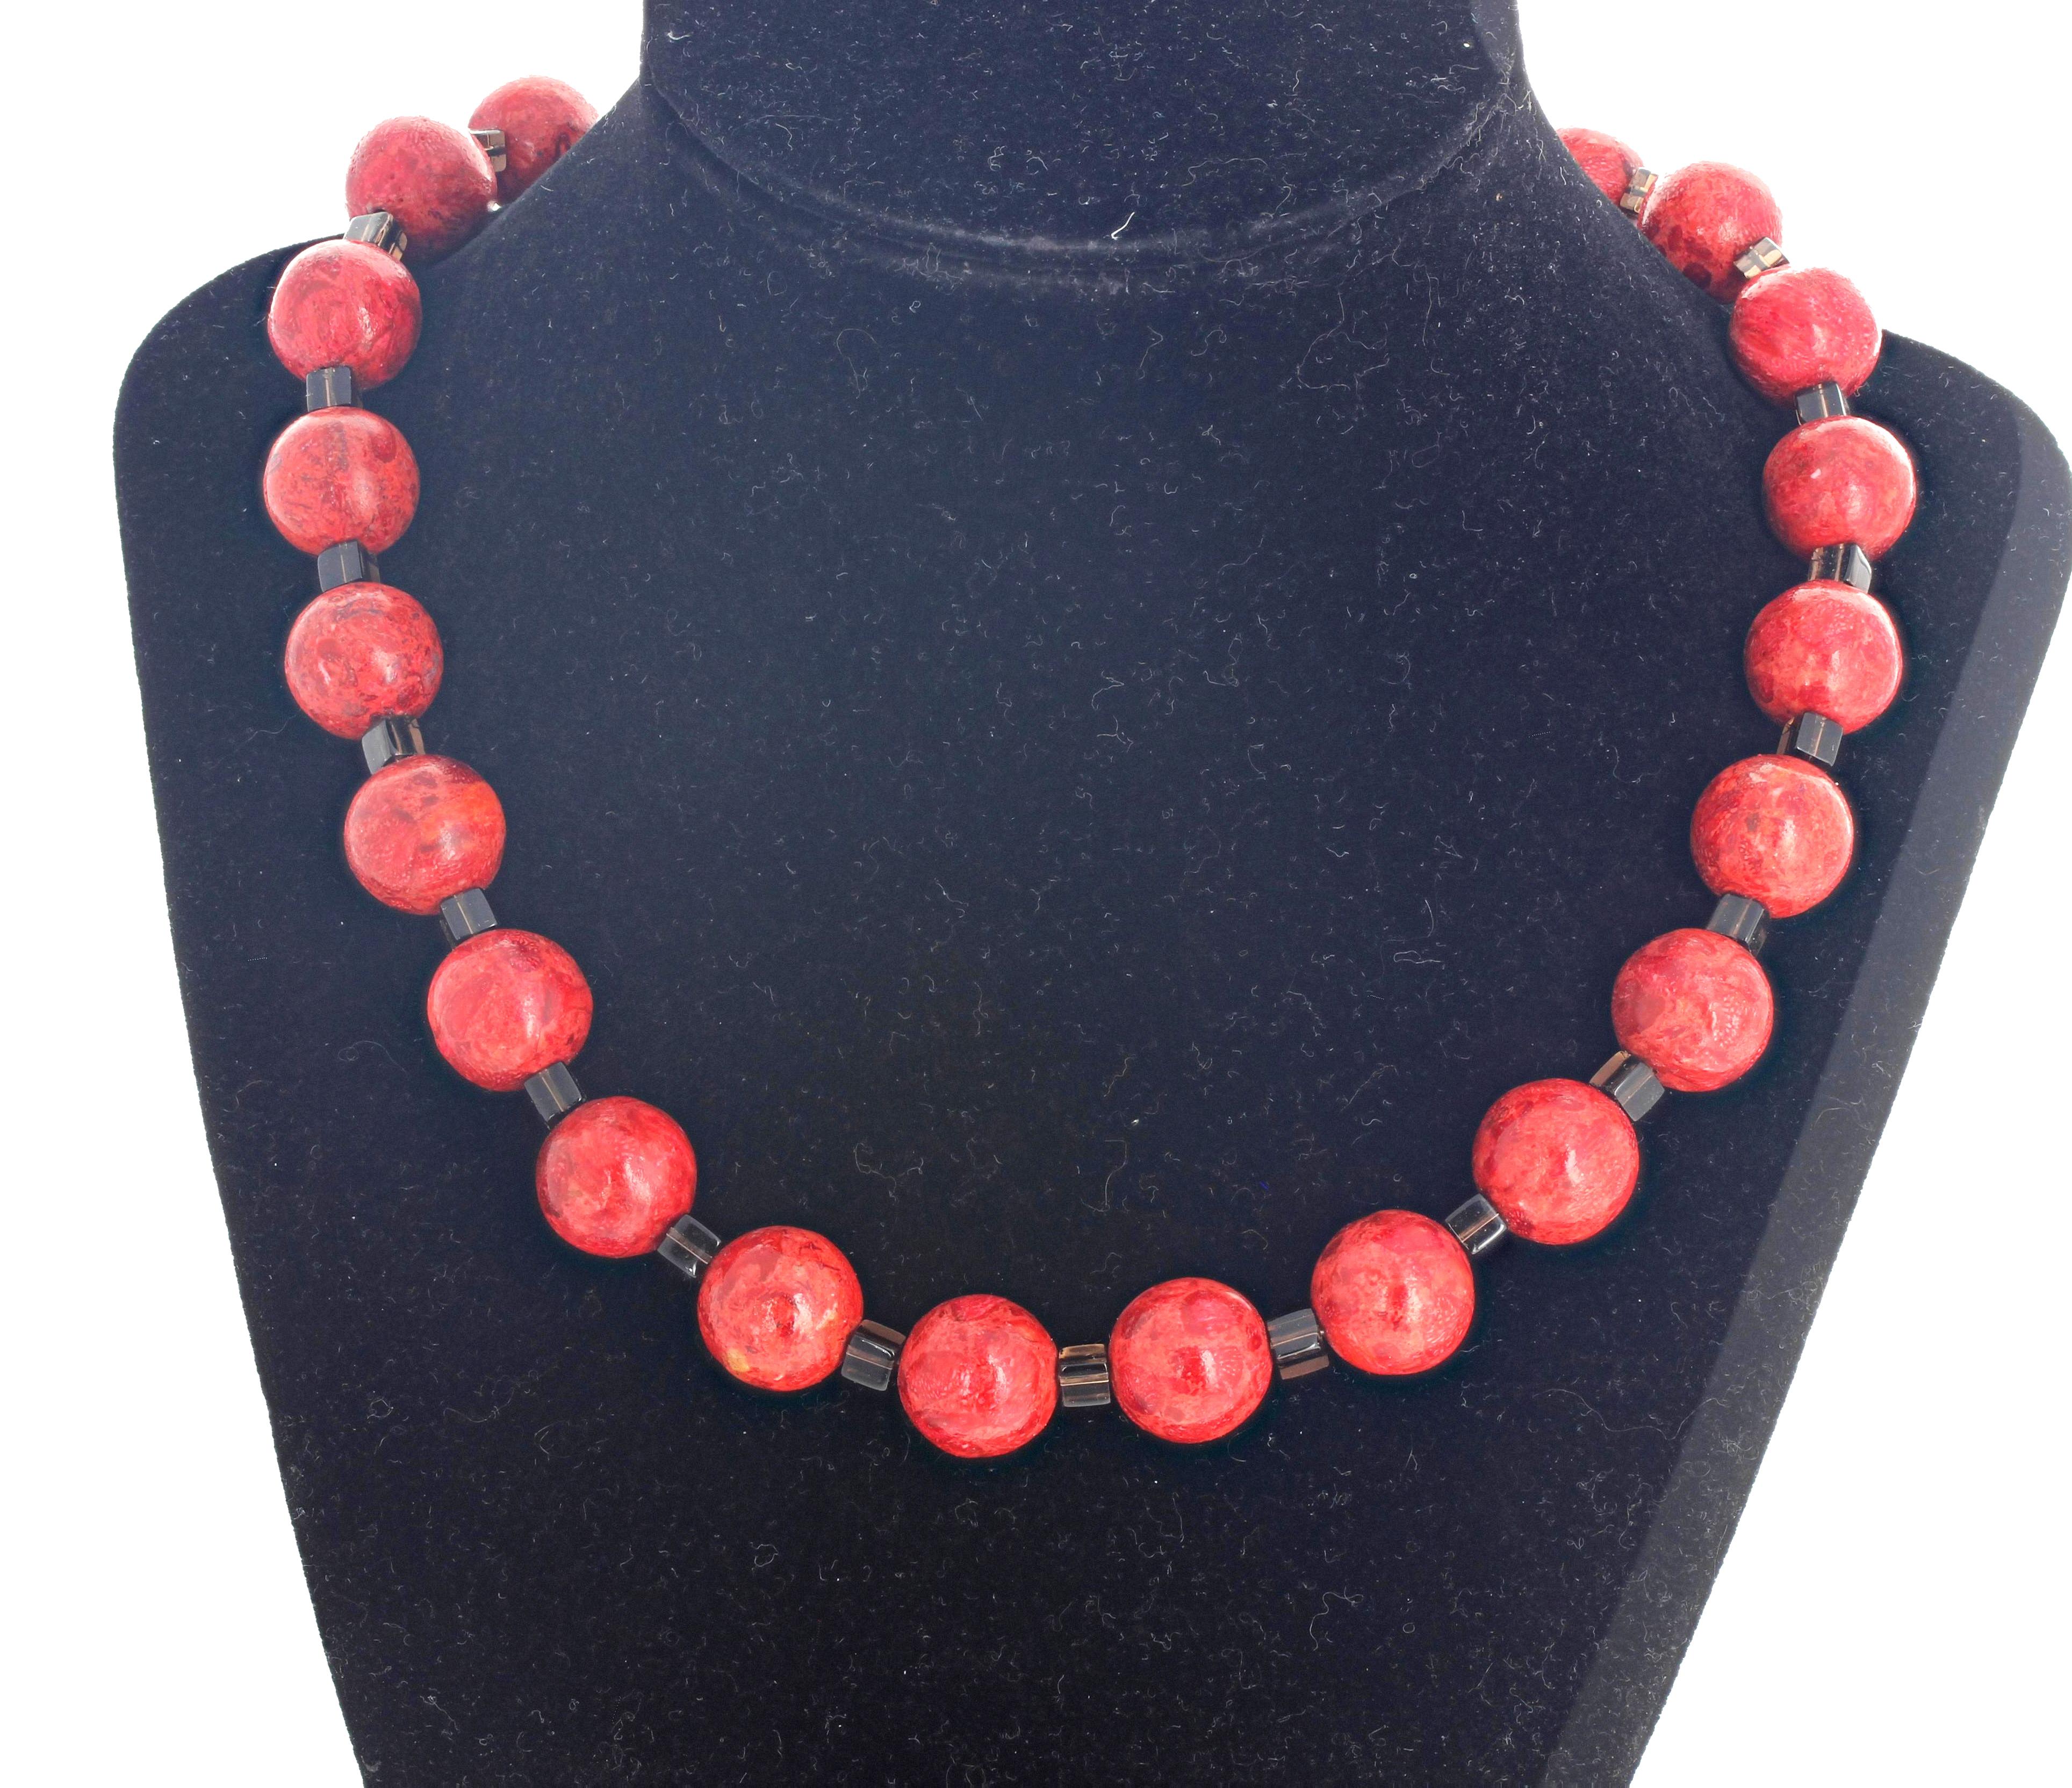 Highly polished Bamboo Coral ( 14 mm) accented with highly polished gem cut cubes of natural Smoky Quartz set in this 18 inch long necklace with easy to use antiqued silver hook clasp.  